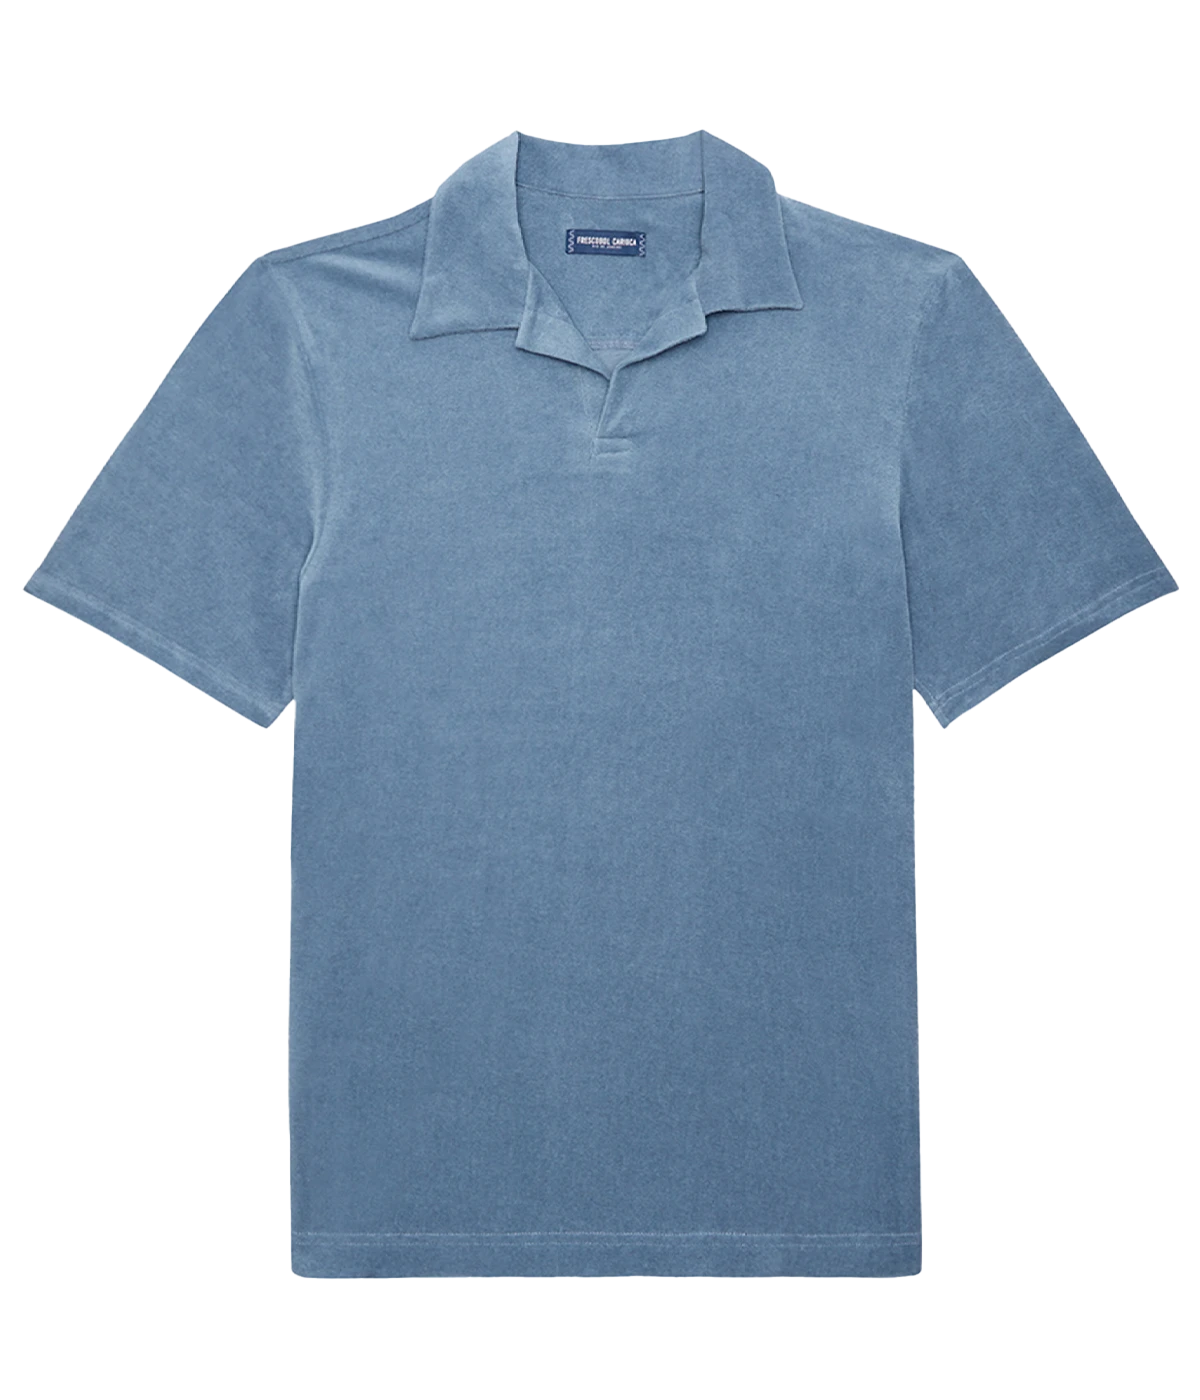 Faustino Terry Cotton Blend Short Sleeve Polo in Summer Nights